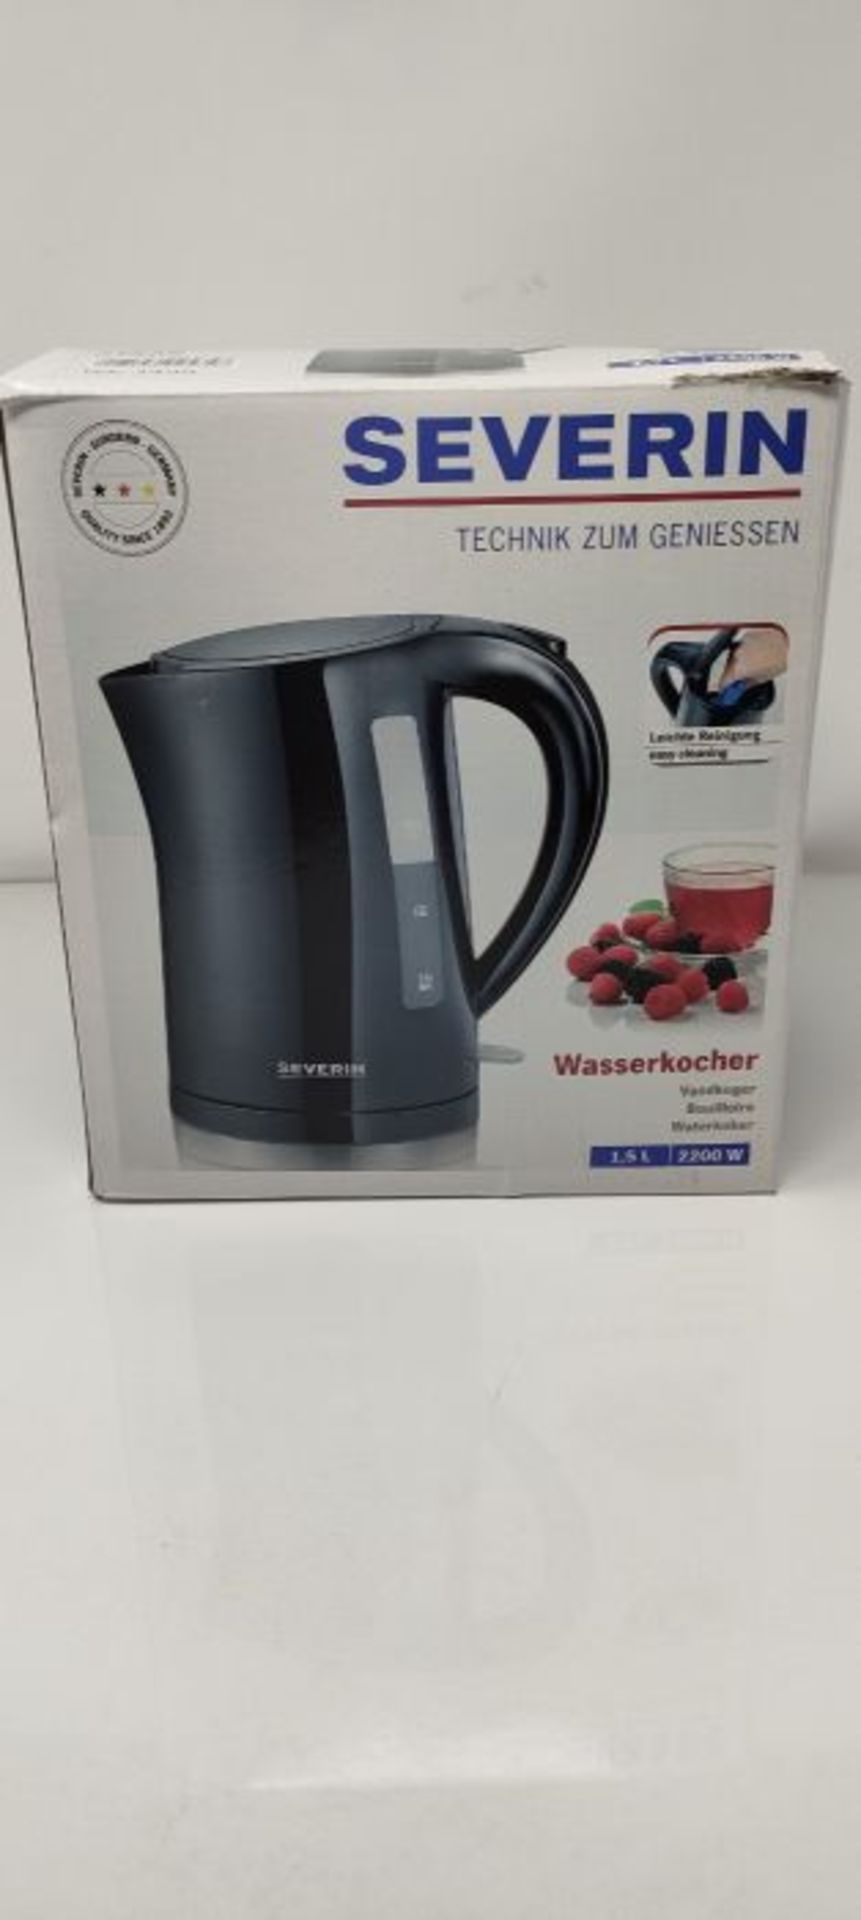 Severin Jug Electric Kettle with 2200 W of Power WK 3498, Black - Image 2 of 3